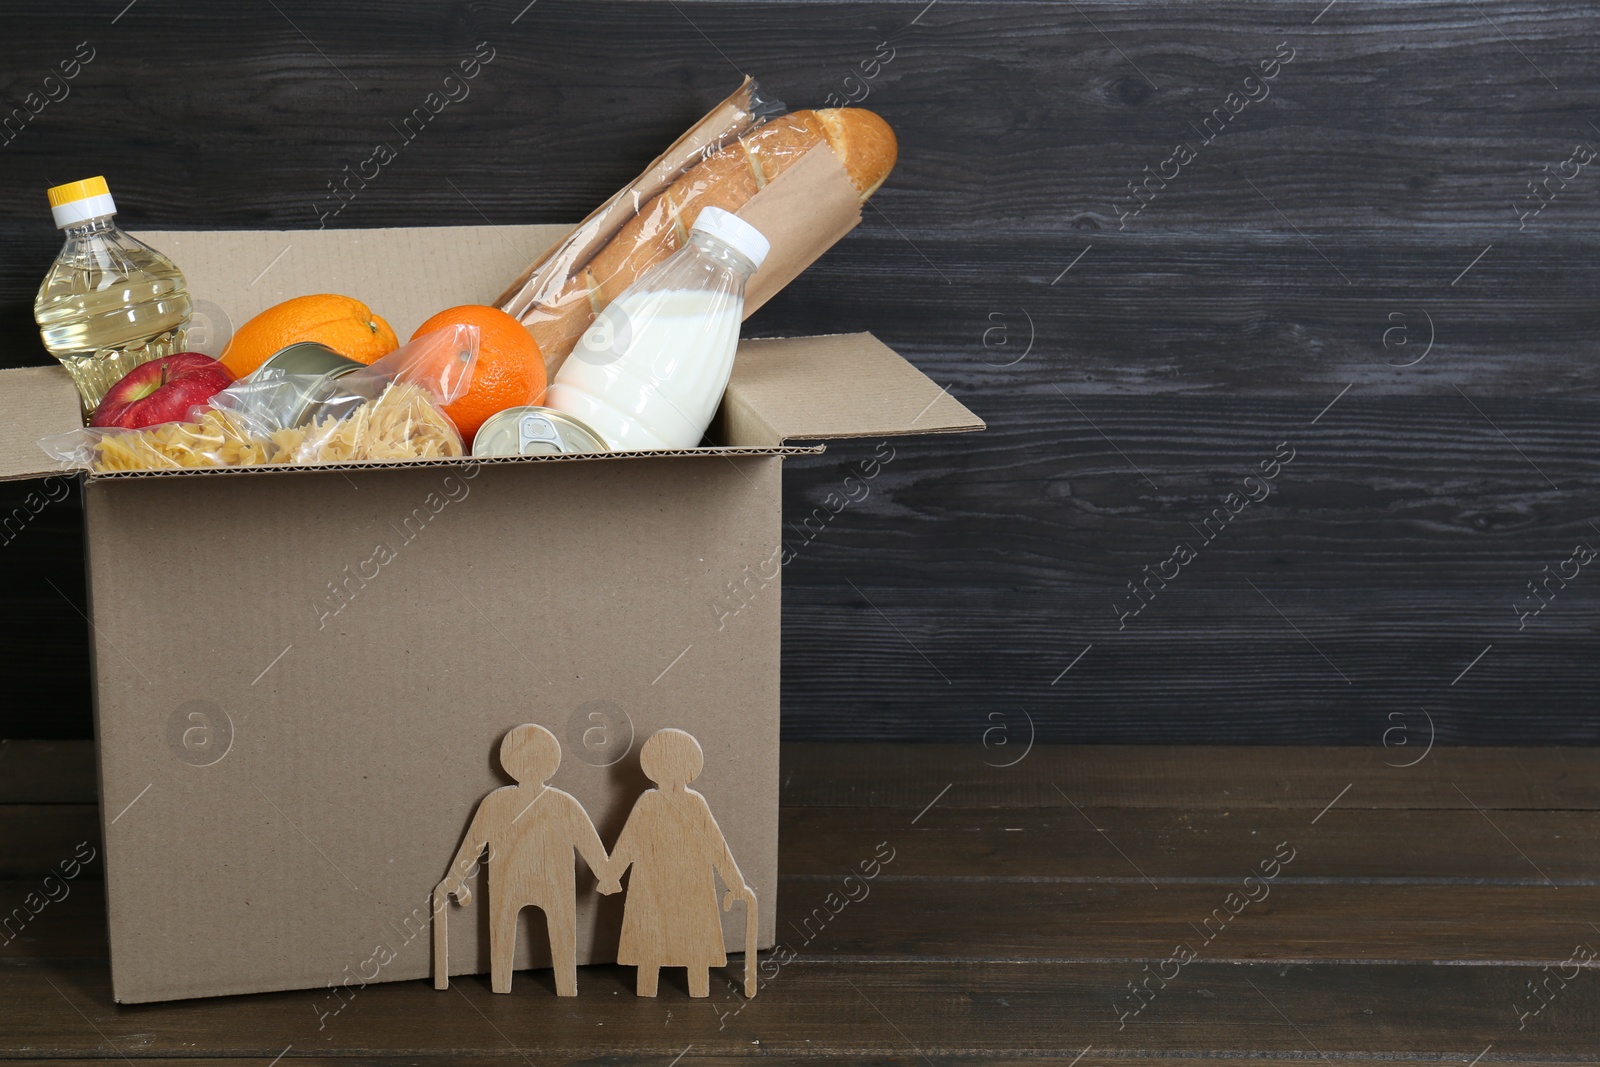 Photo of Humanitarian aid for elderly people. Cardboard box with donation food and figures of couple on wooden table, closeup